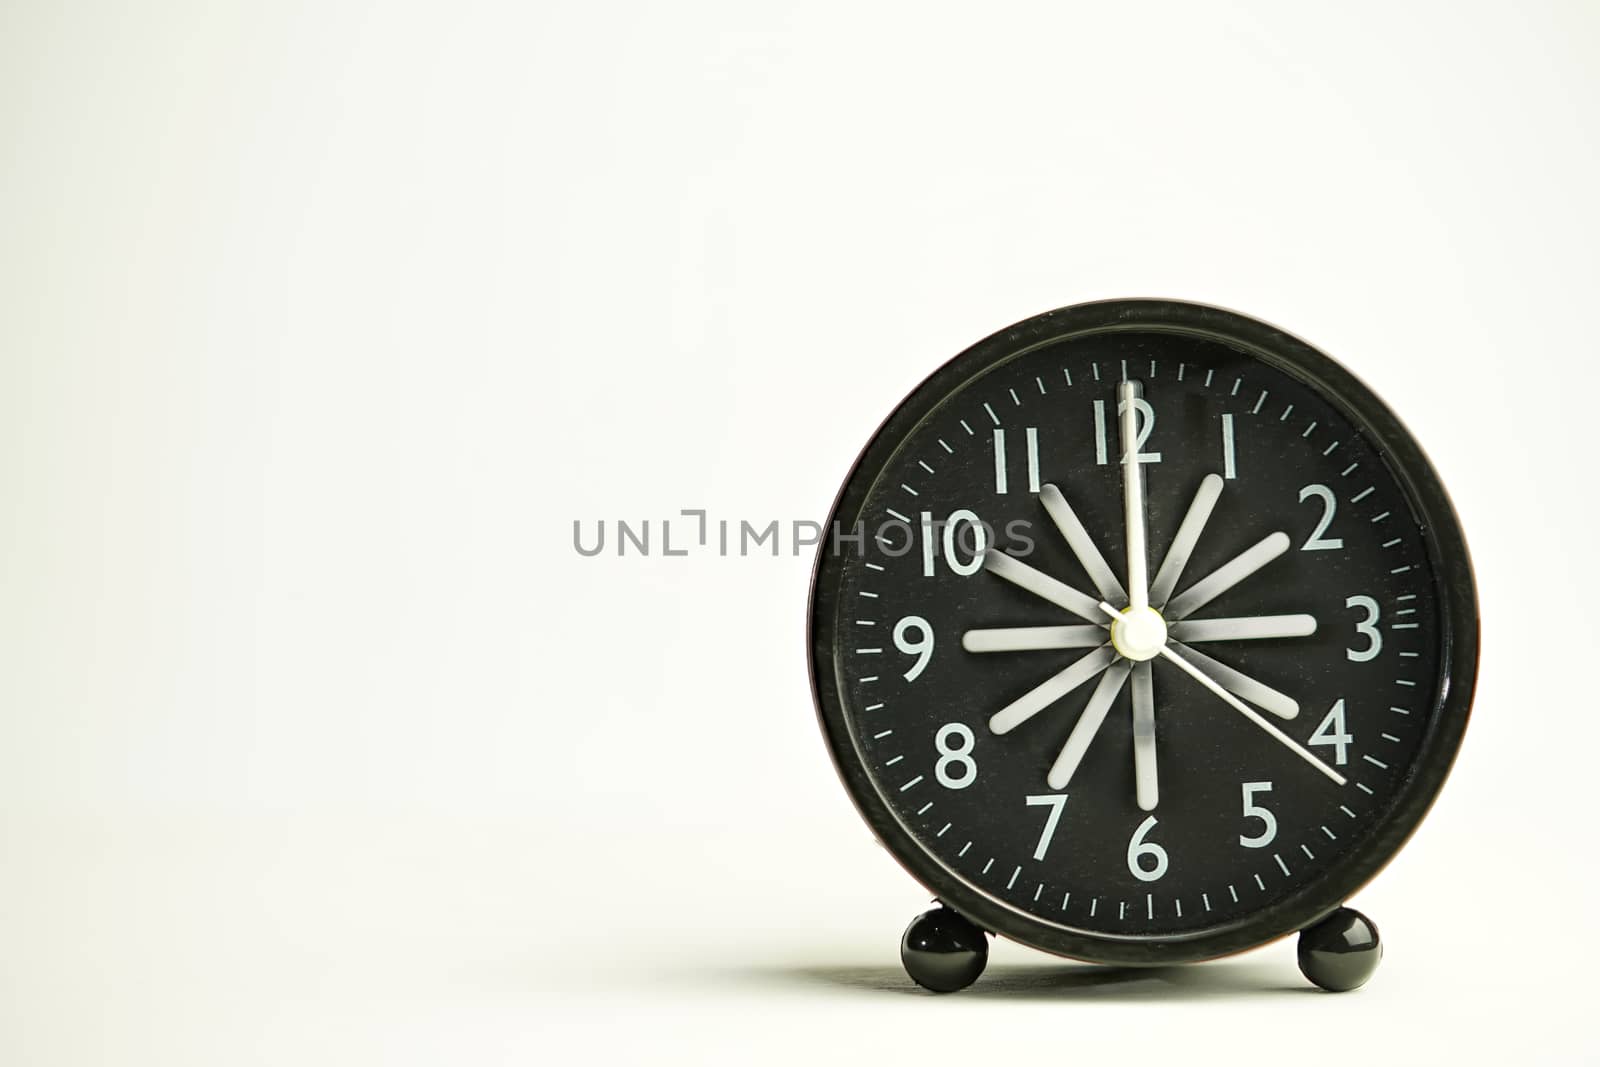 Abstract black analog alarm clock close-up inside being dusted island vintage style isolated white background with copy space. Use the Radius Blur technique.